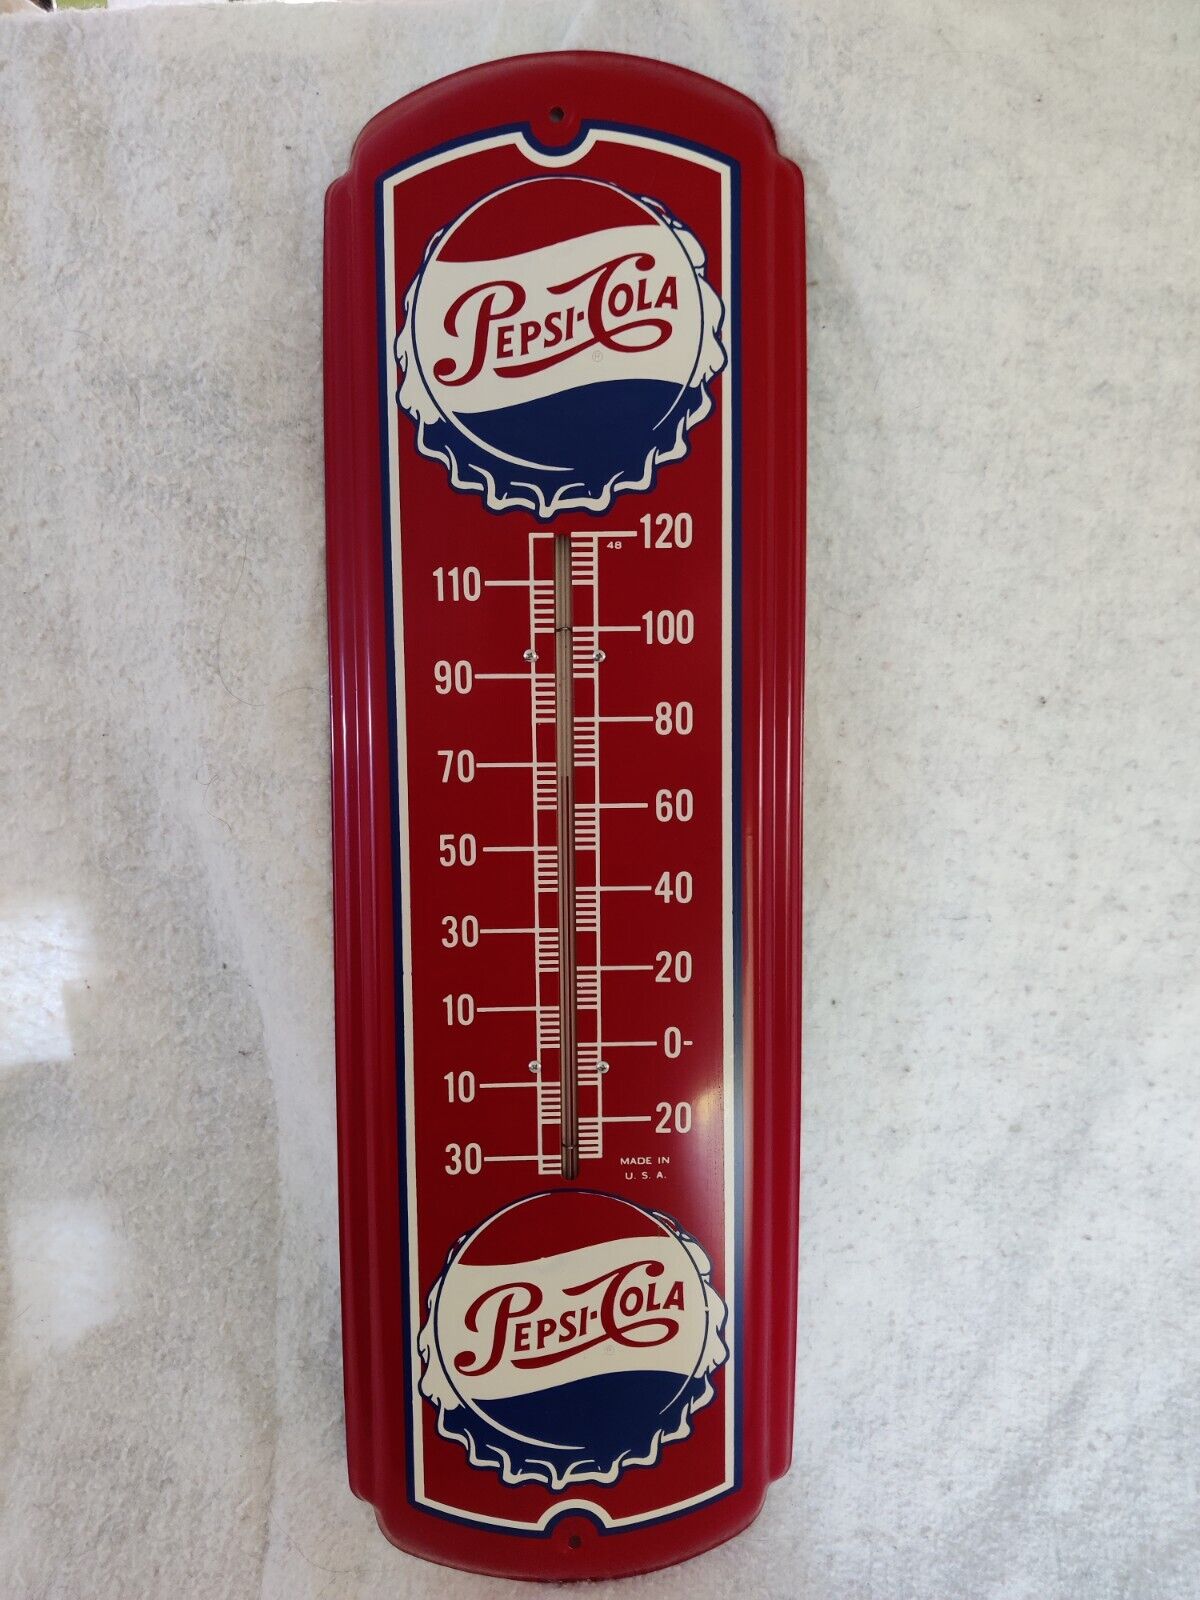 PEPSI-COLA Vintage Metal Thermometer - Red - Excellent Condition NIB